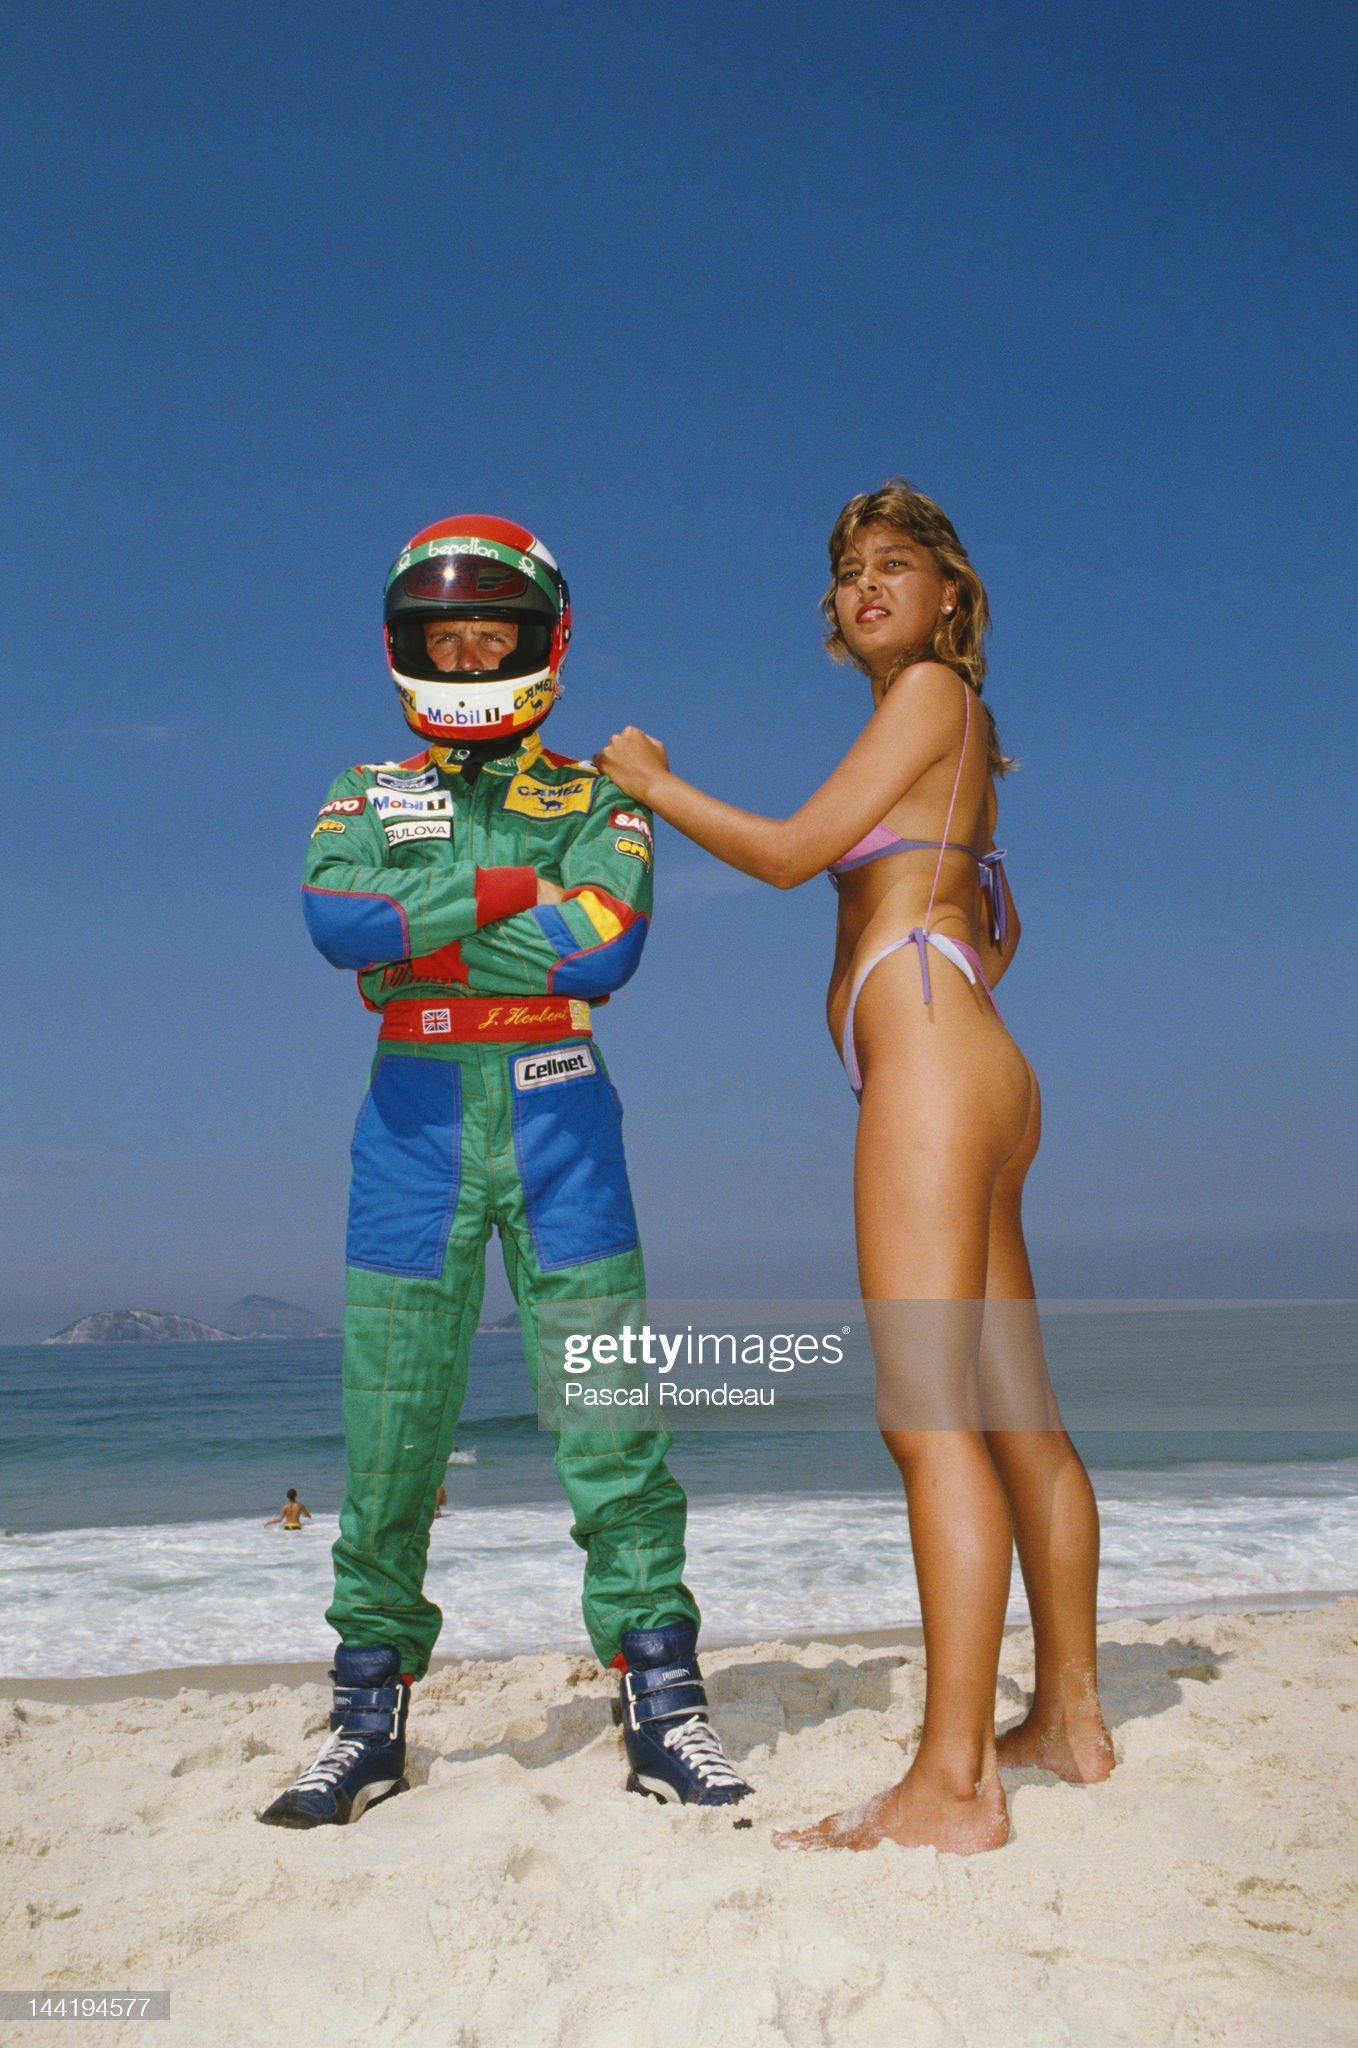 Johnny Herbert of Great Britain and driver of the n.20 Benetton B188 Ford V8 poses for a portrait, with a girl wearing a bikini, on the beach in Rio de Janeiro after practice for the Brazilian Grand Prix on 25th March 1989 at the Autodromo Internacional Nelson Piquet Jacarepagua circuit near Rio de Janeiro, Brazil. 